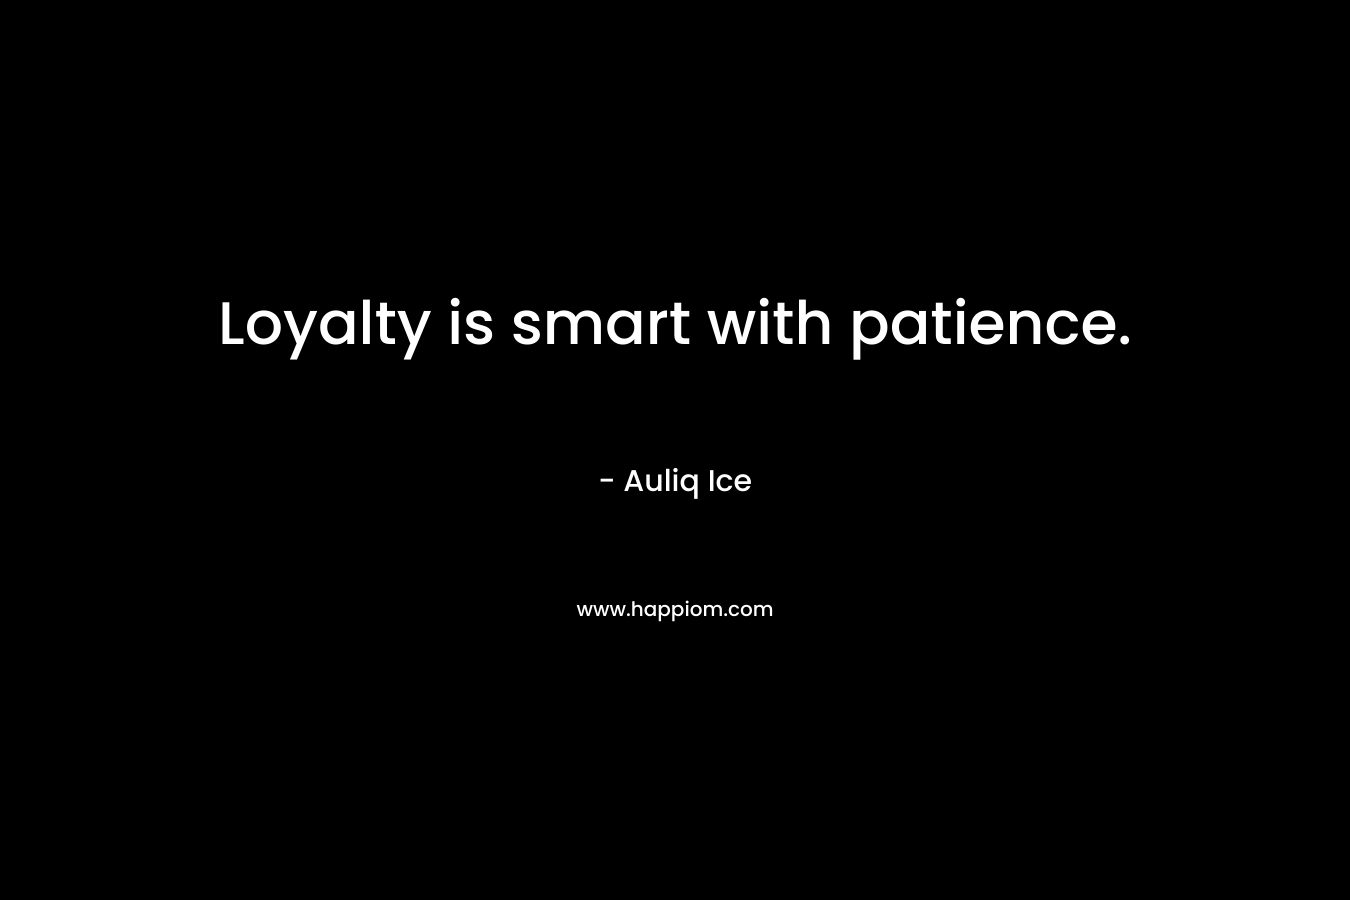 Loyalty is smart with patience. – Auliq Ice